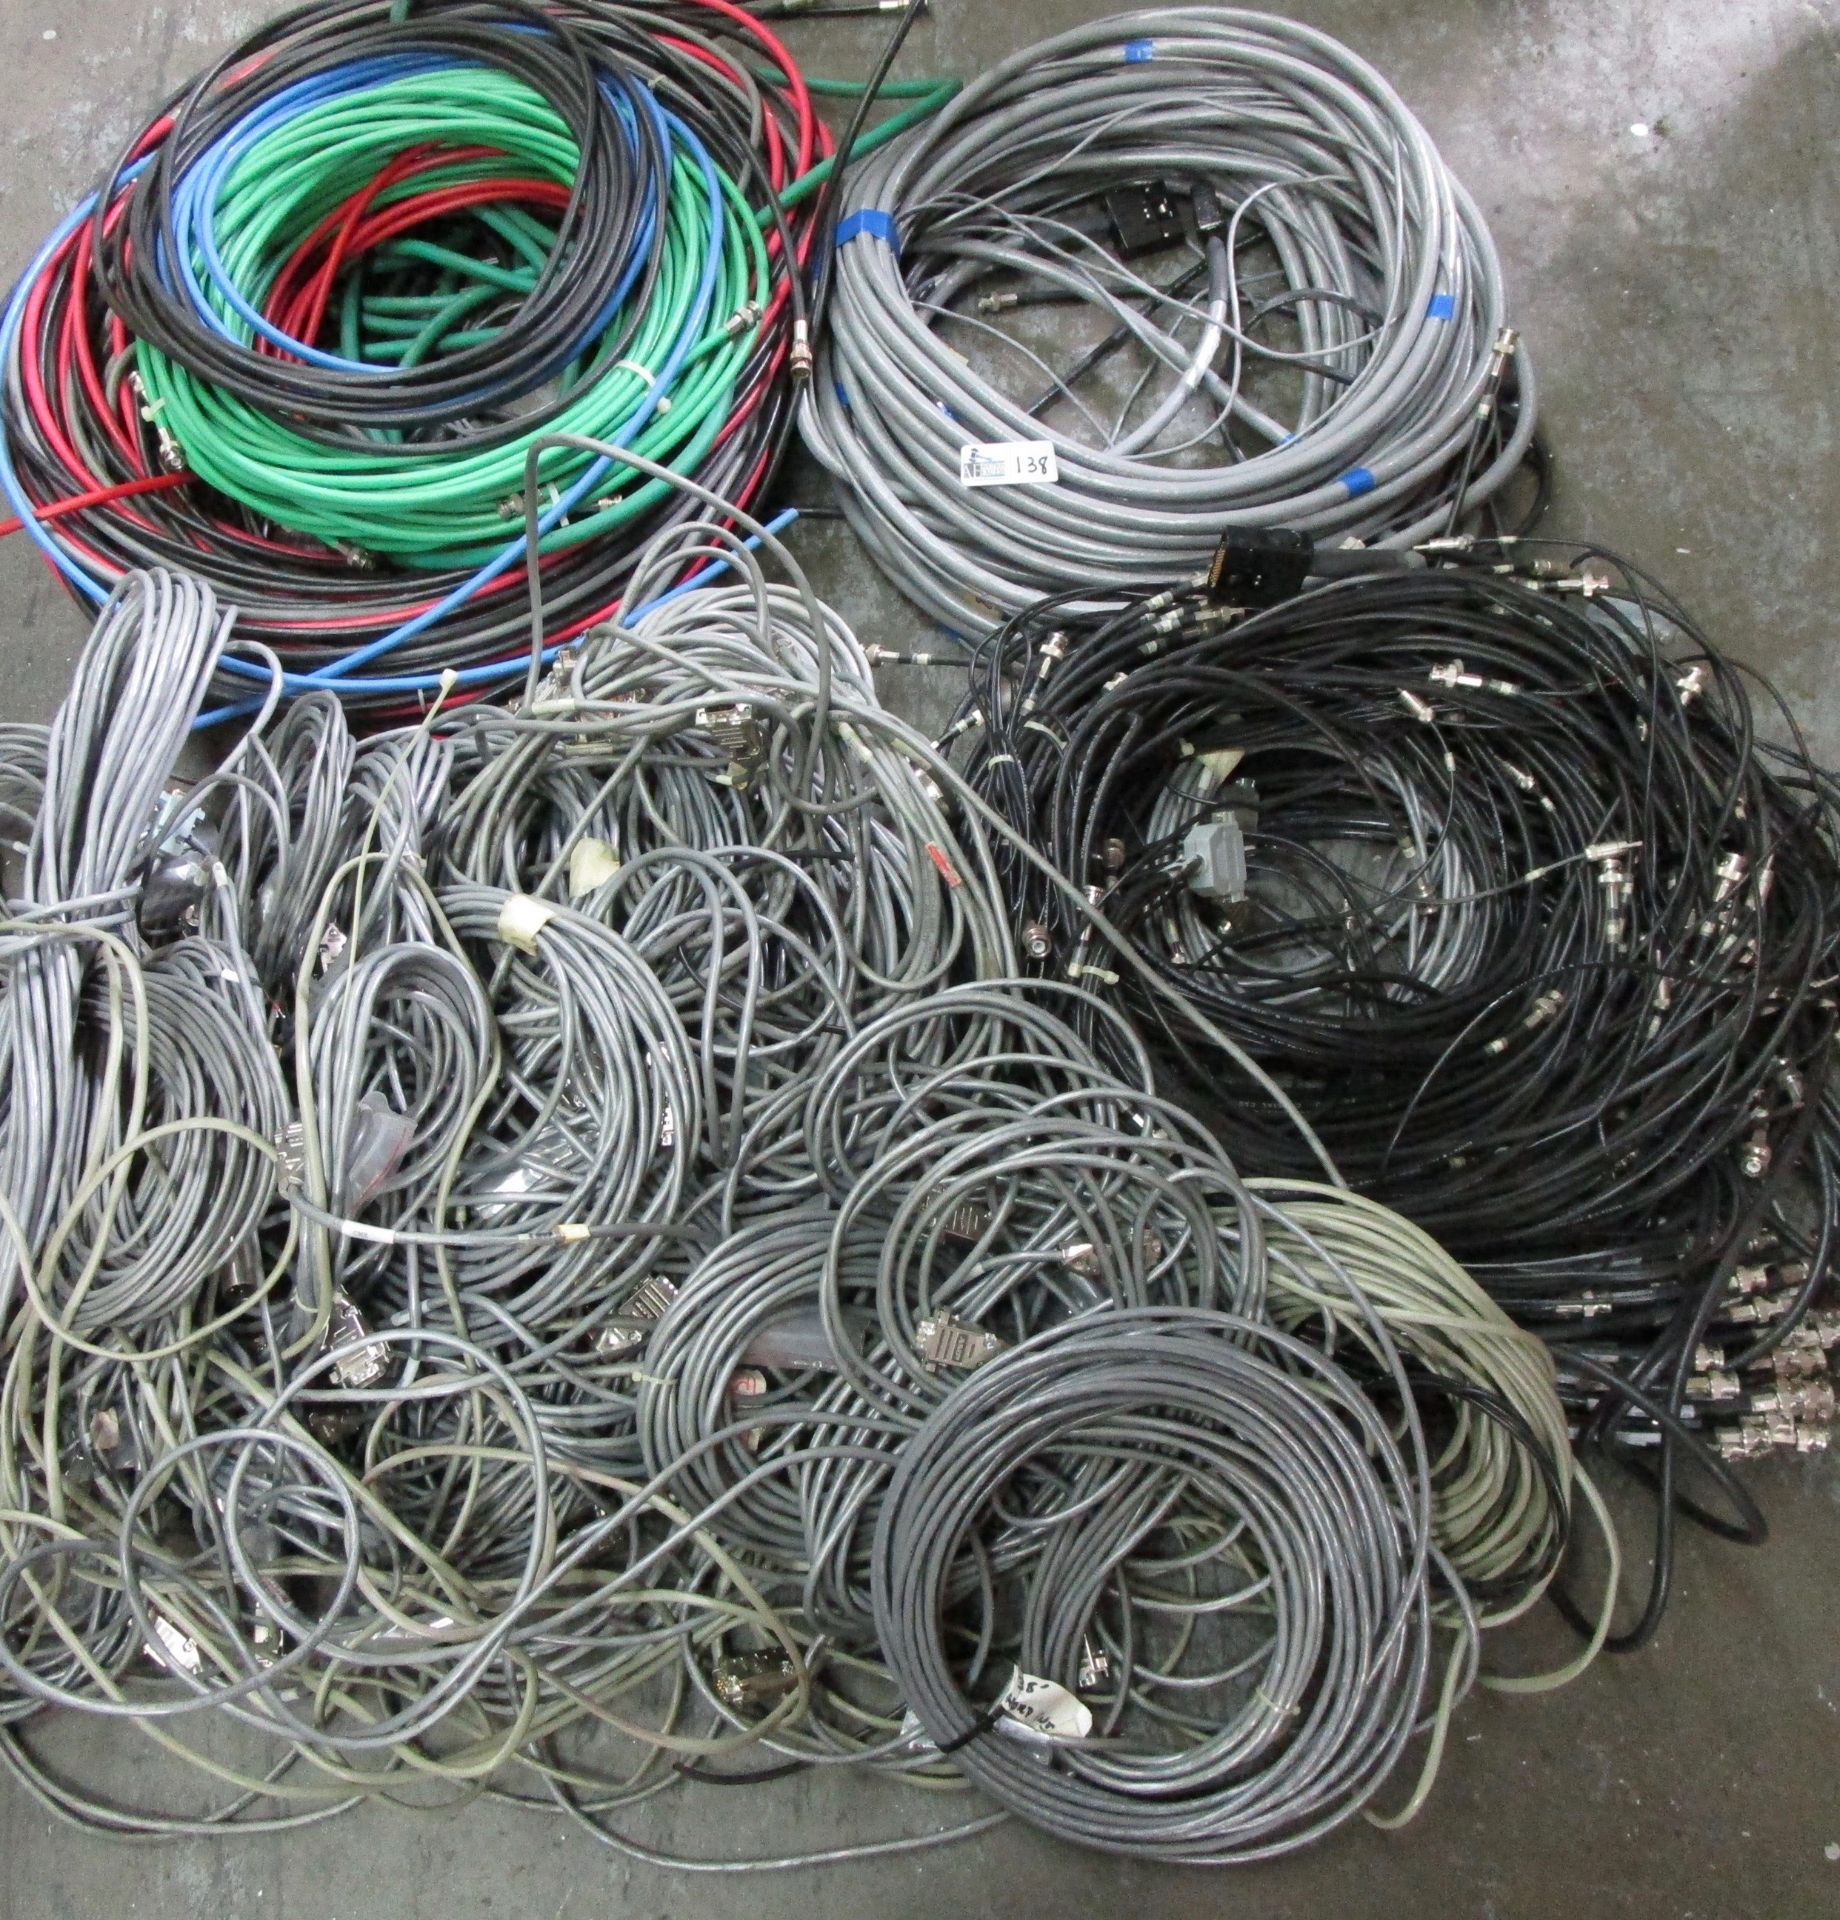 LOT SIGNAL/VIDEO/AUDIO CABLE